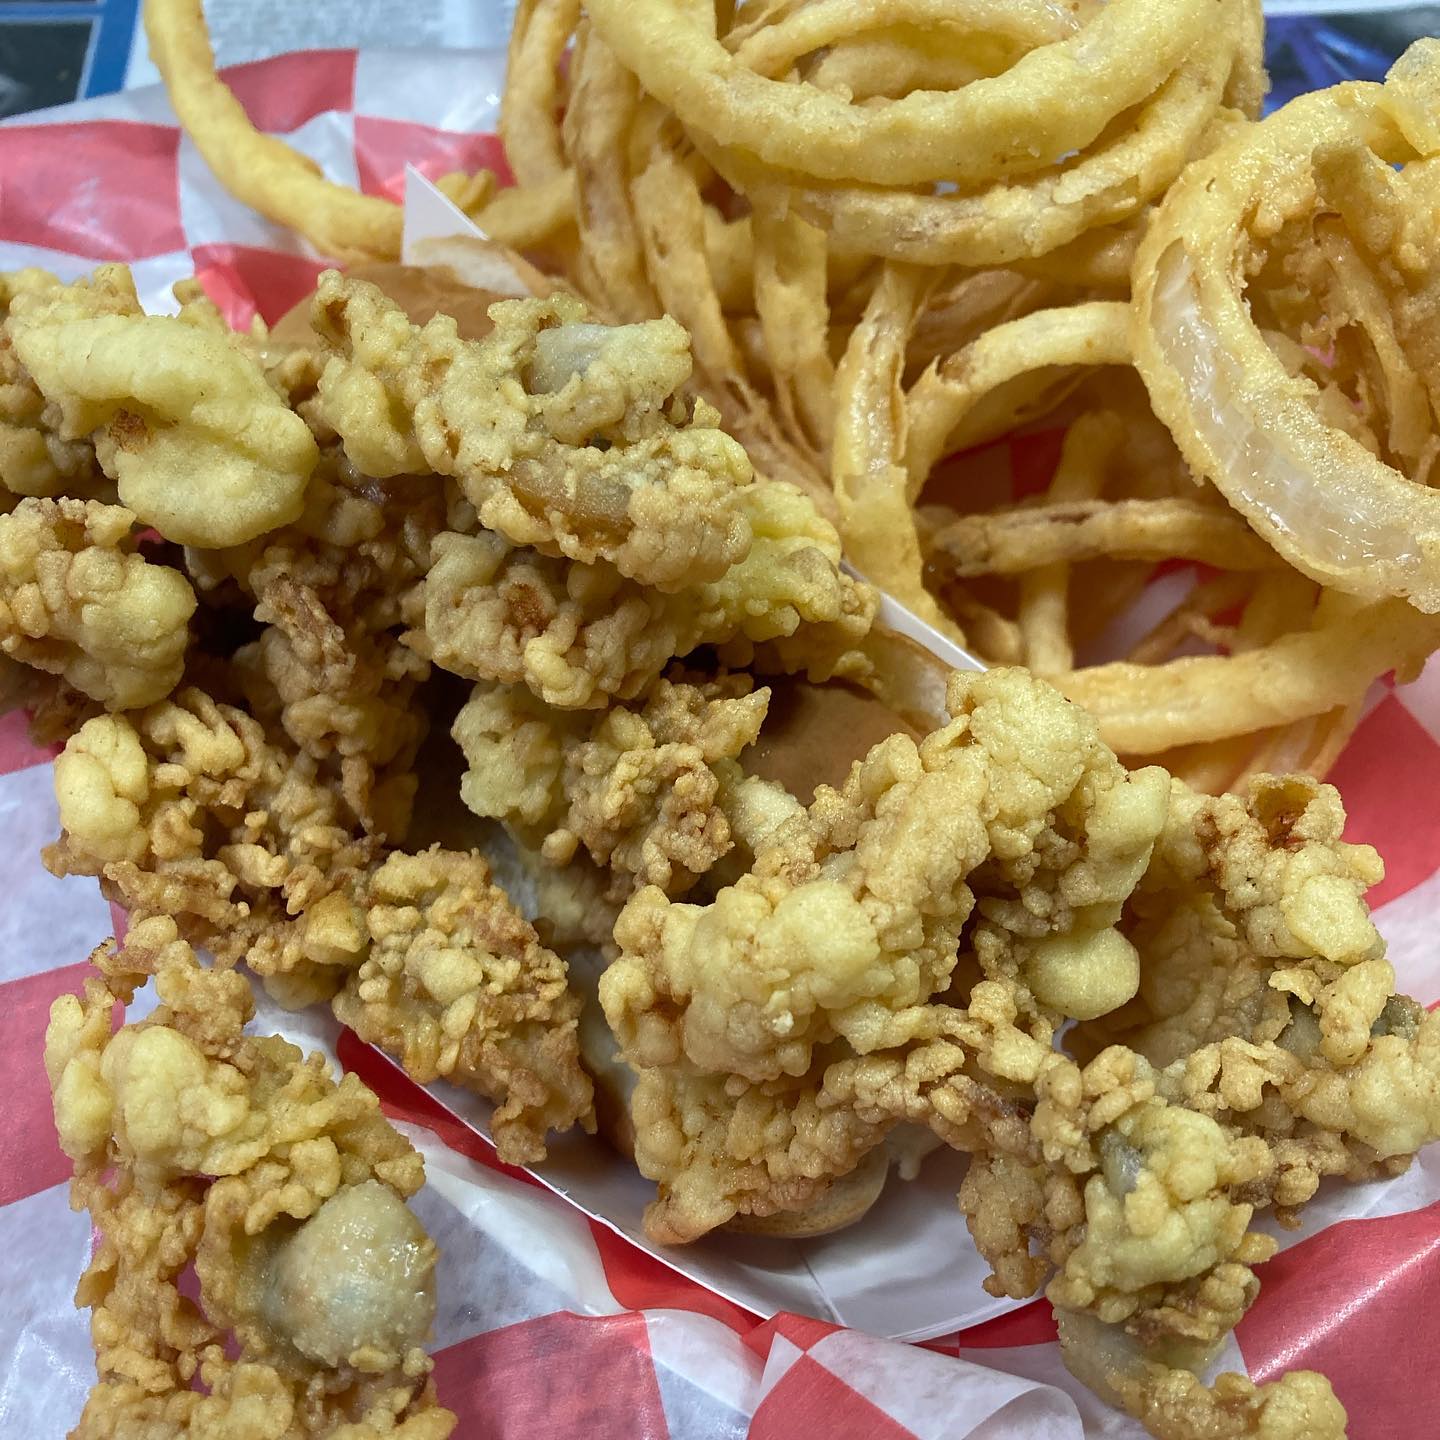 Yes, we have fried Whole Clams! Fresh clams from Maine arrived this morning. Happy Friday!